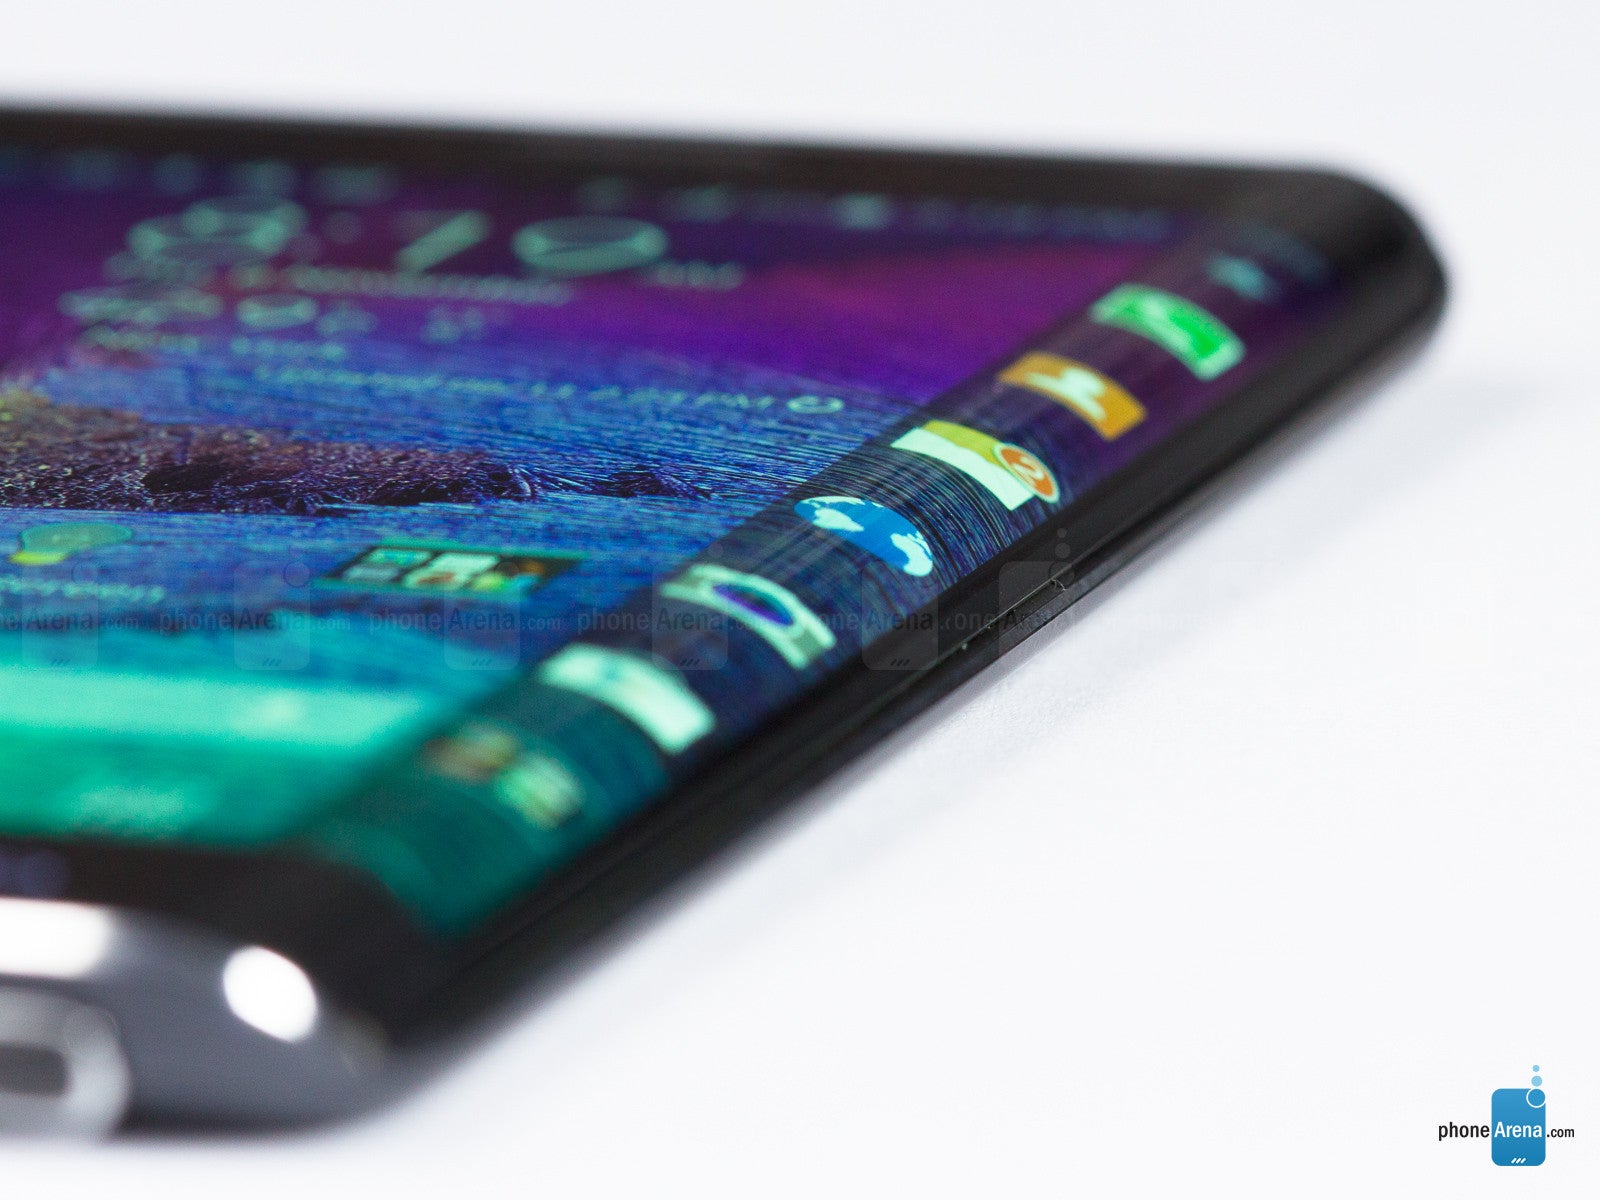 The defining features of 2014's high-end Android smartphones